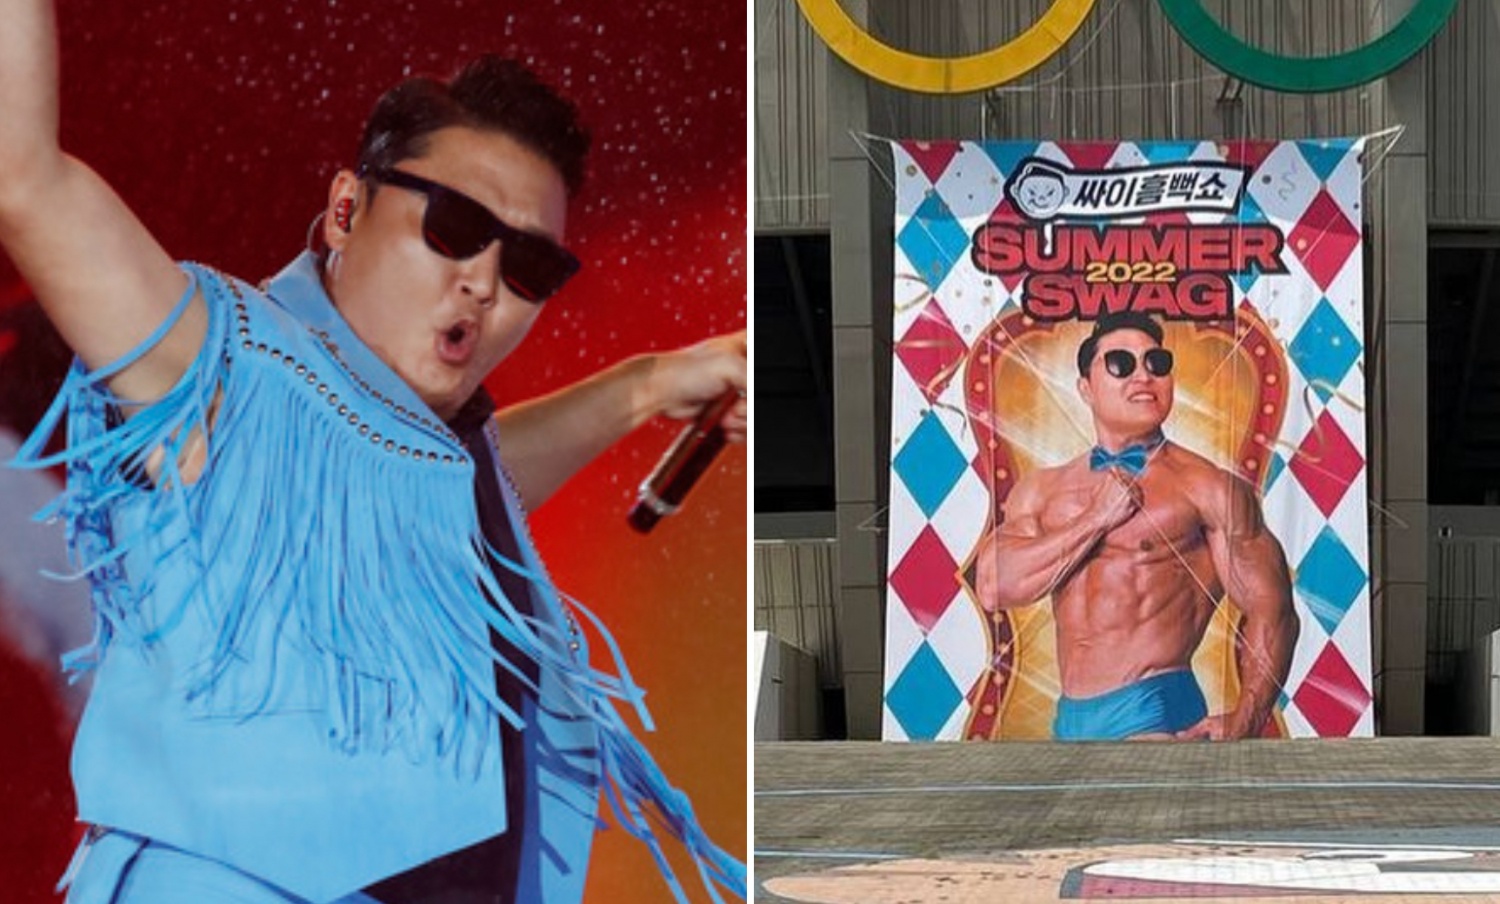 PSY's 'Summer Swag 2022' Faces Criticism Again as More Issues Arise